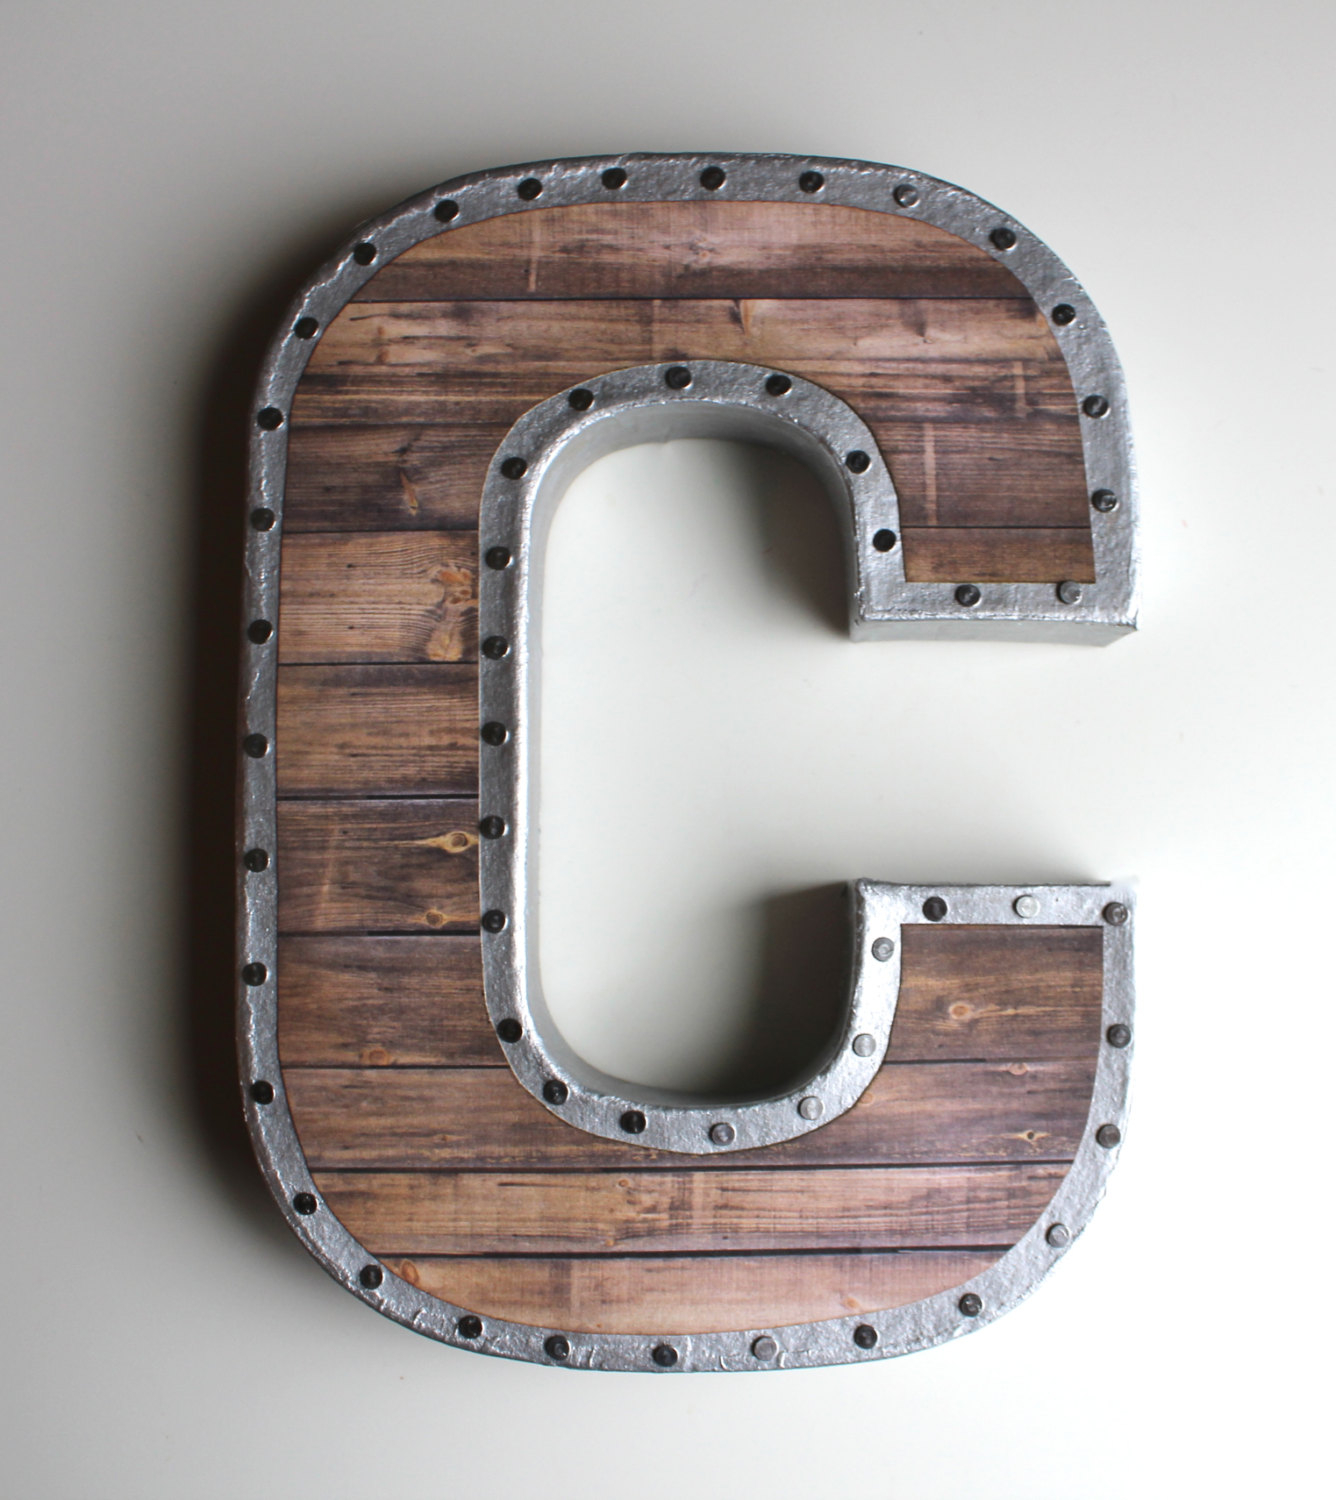 Large Monogram Letters Wall Decor With Large Scrabble Letters Wall Decor  Plus Large Wooden Letters For Wall Decor Together With Large Metal Letters  For Wall